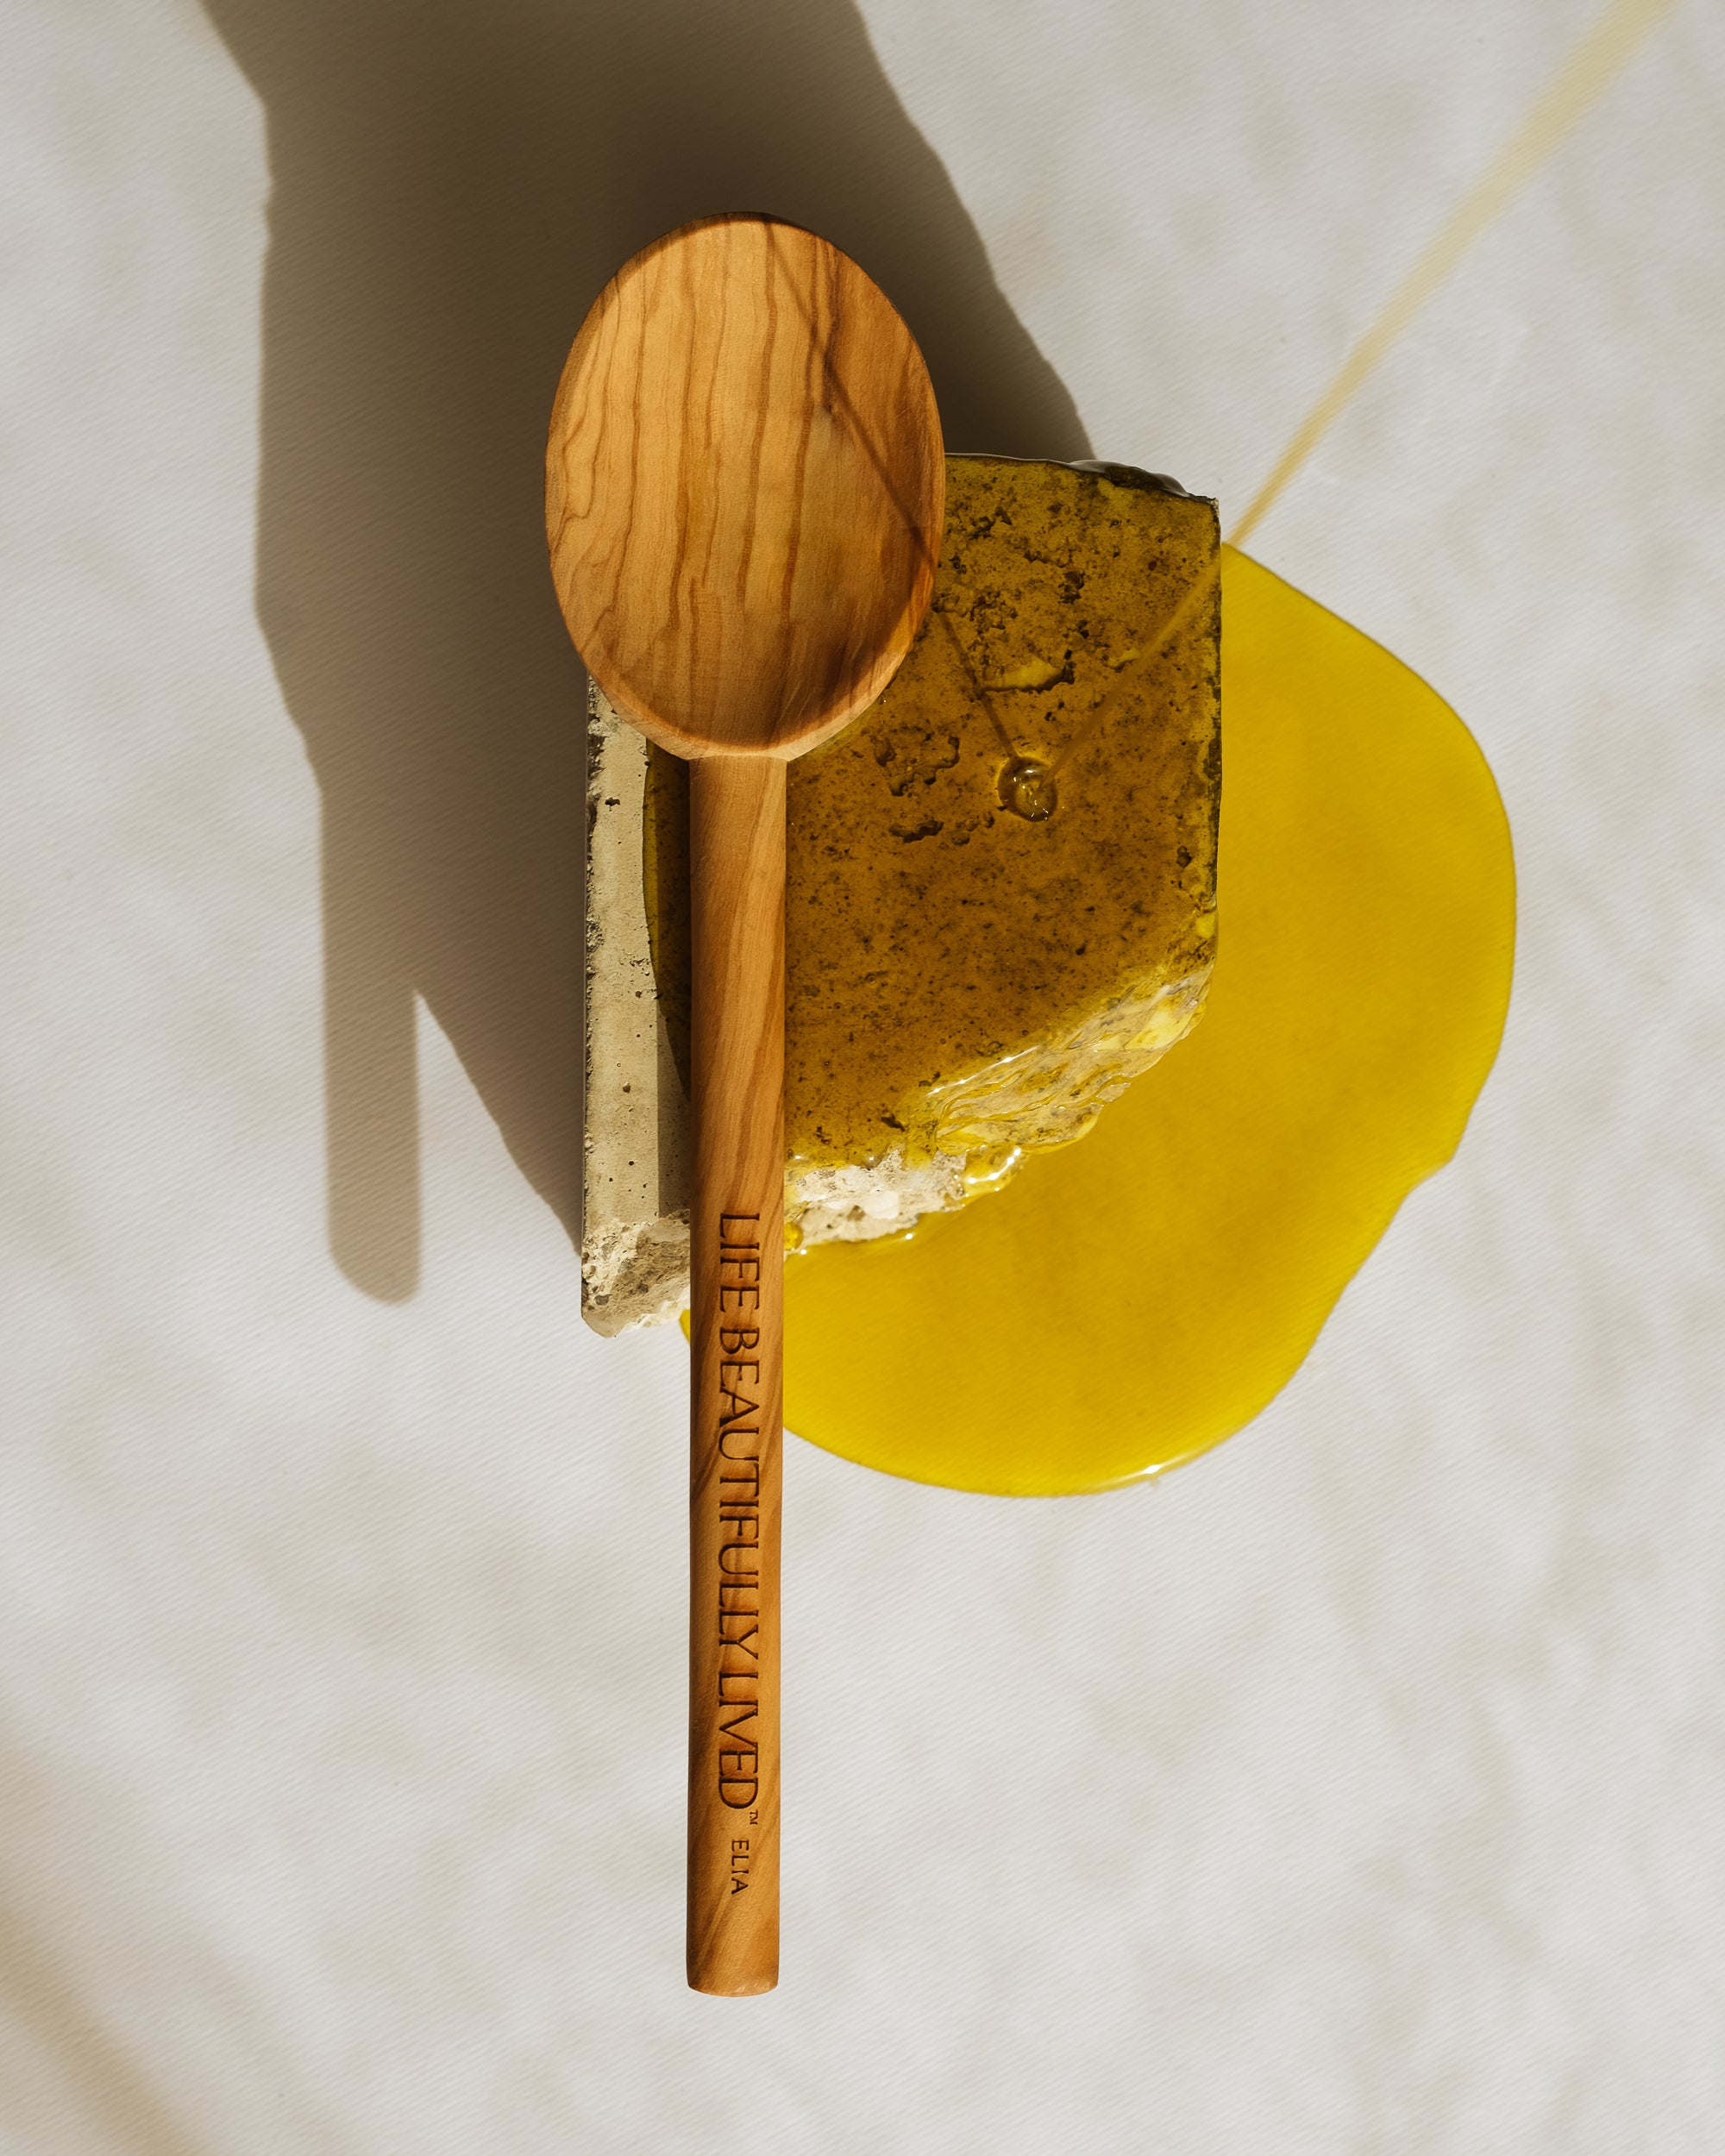 THE OLIVE WOOD SPOON - WHOLESALE